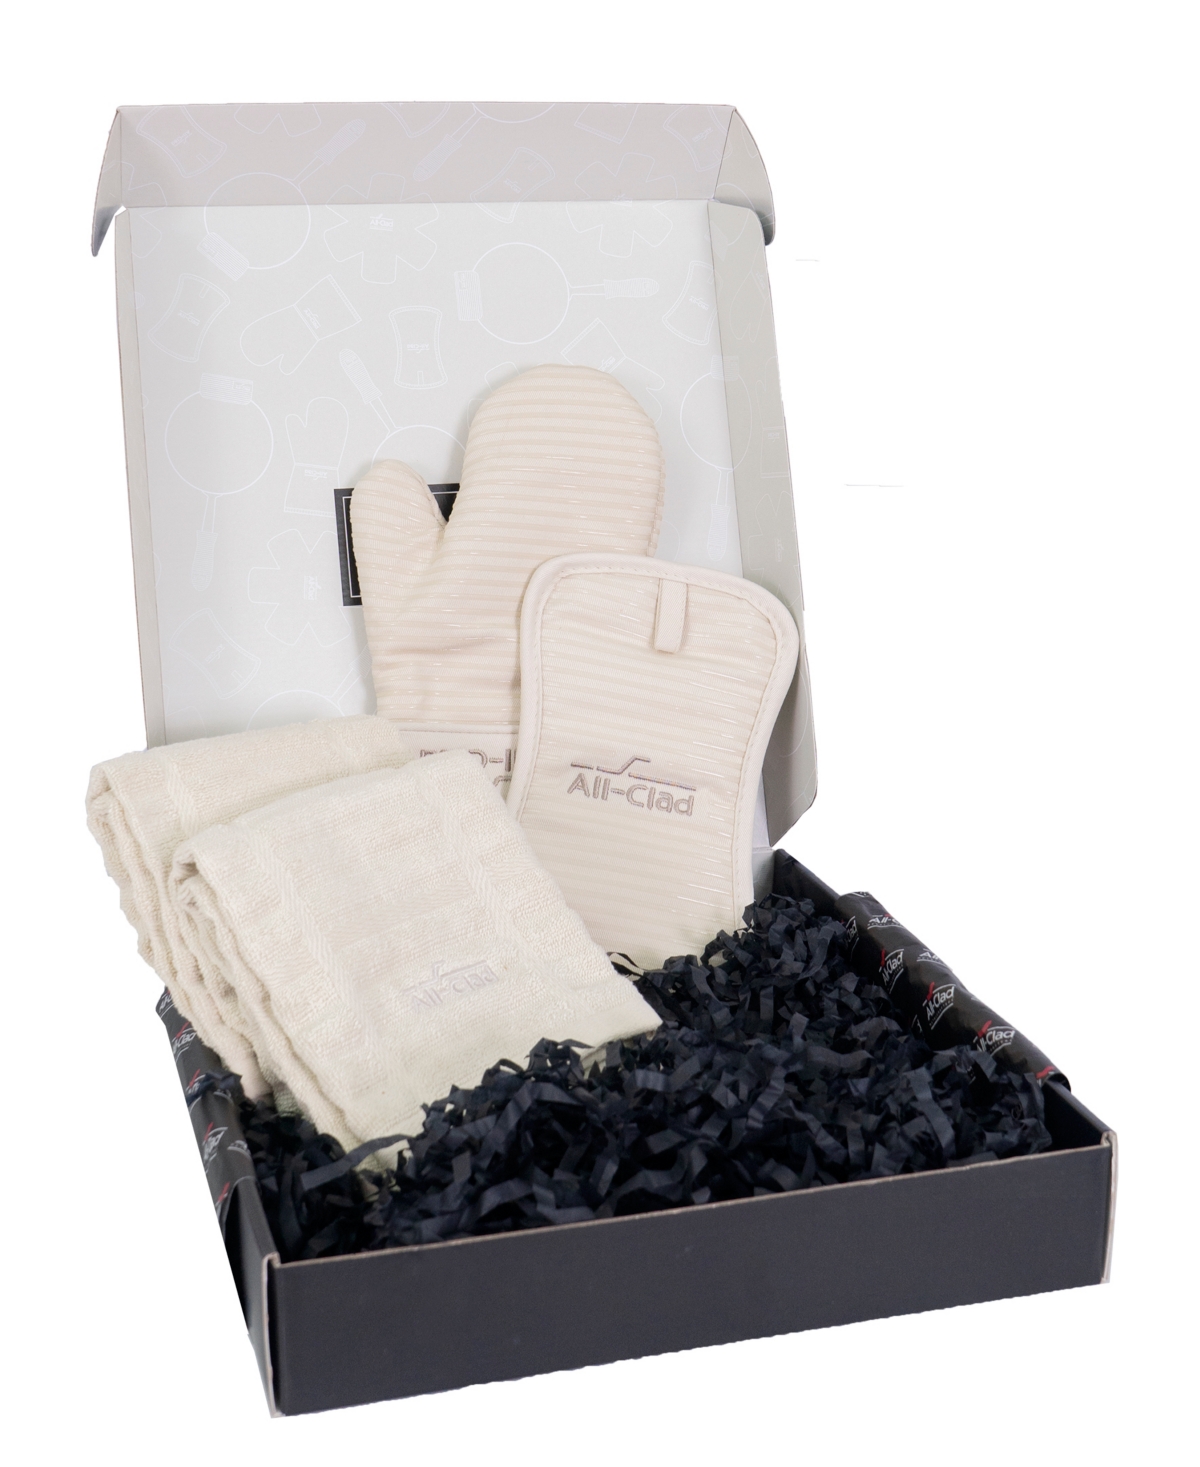 Foundation Collection 4-Piece Gift Set - Almond